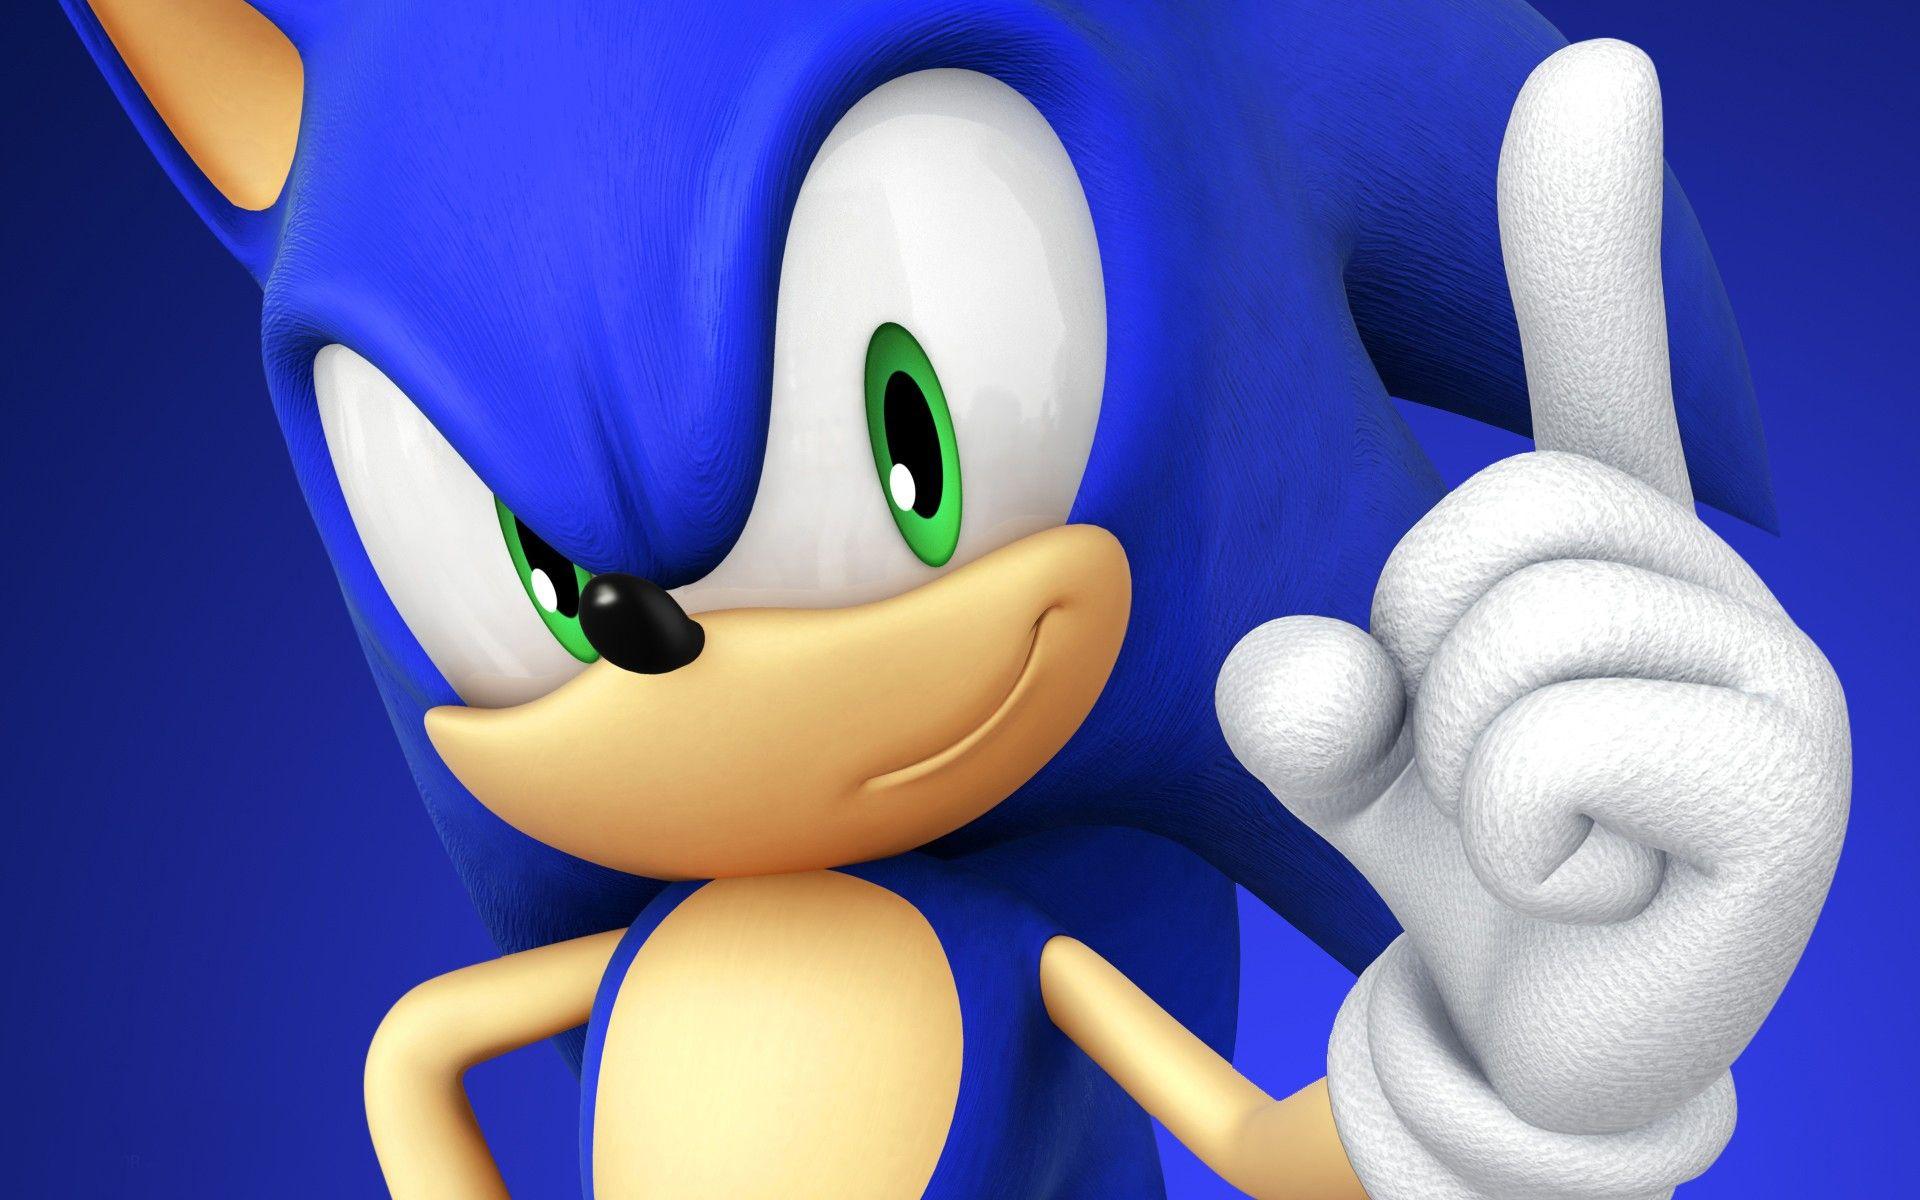 Sonic The Hedgehog Wallpaper HD - Image And Wallpaper